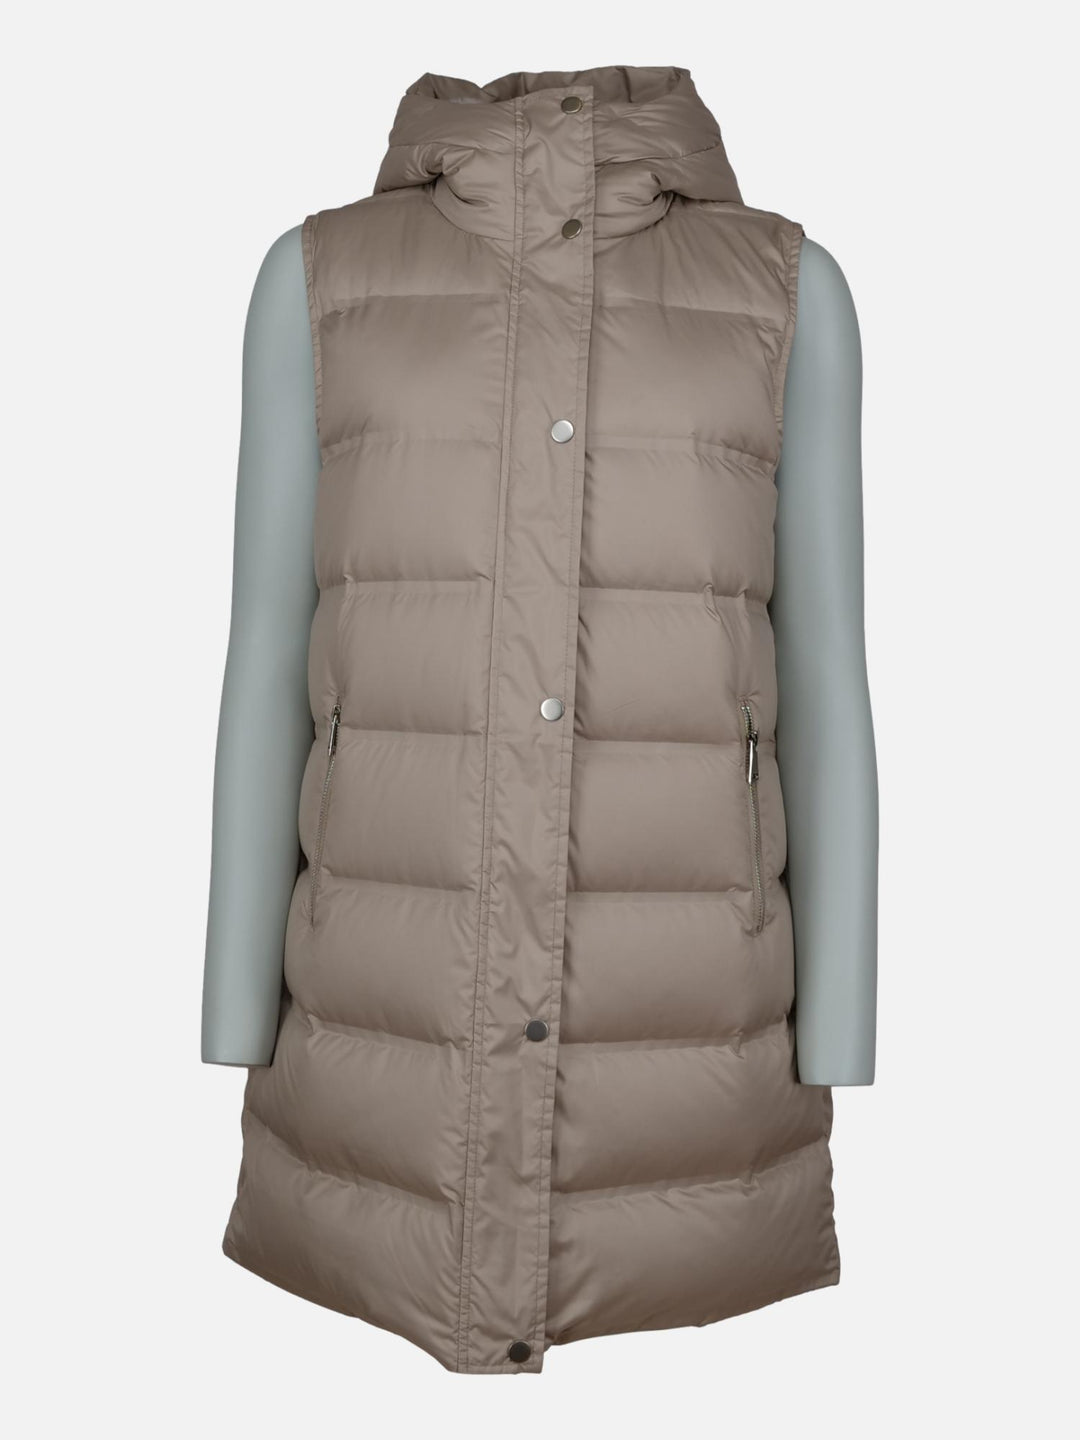 Galbana, 88 cm. - Down Vest with Hood - Women - Taupe